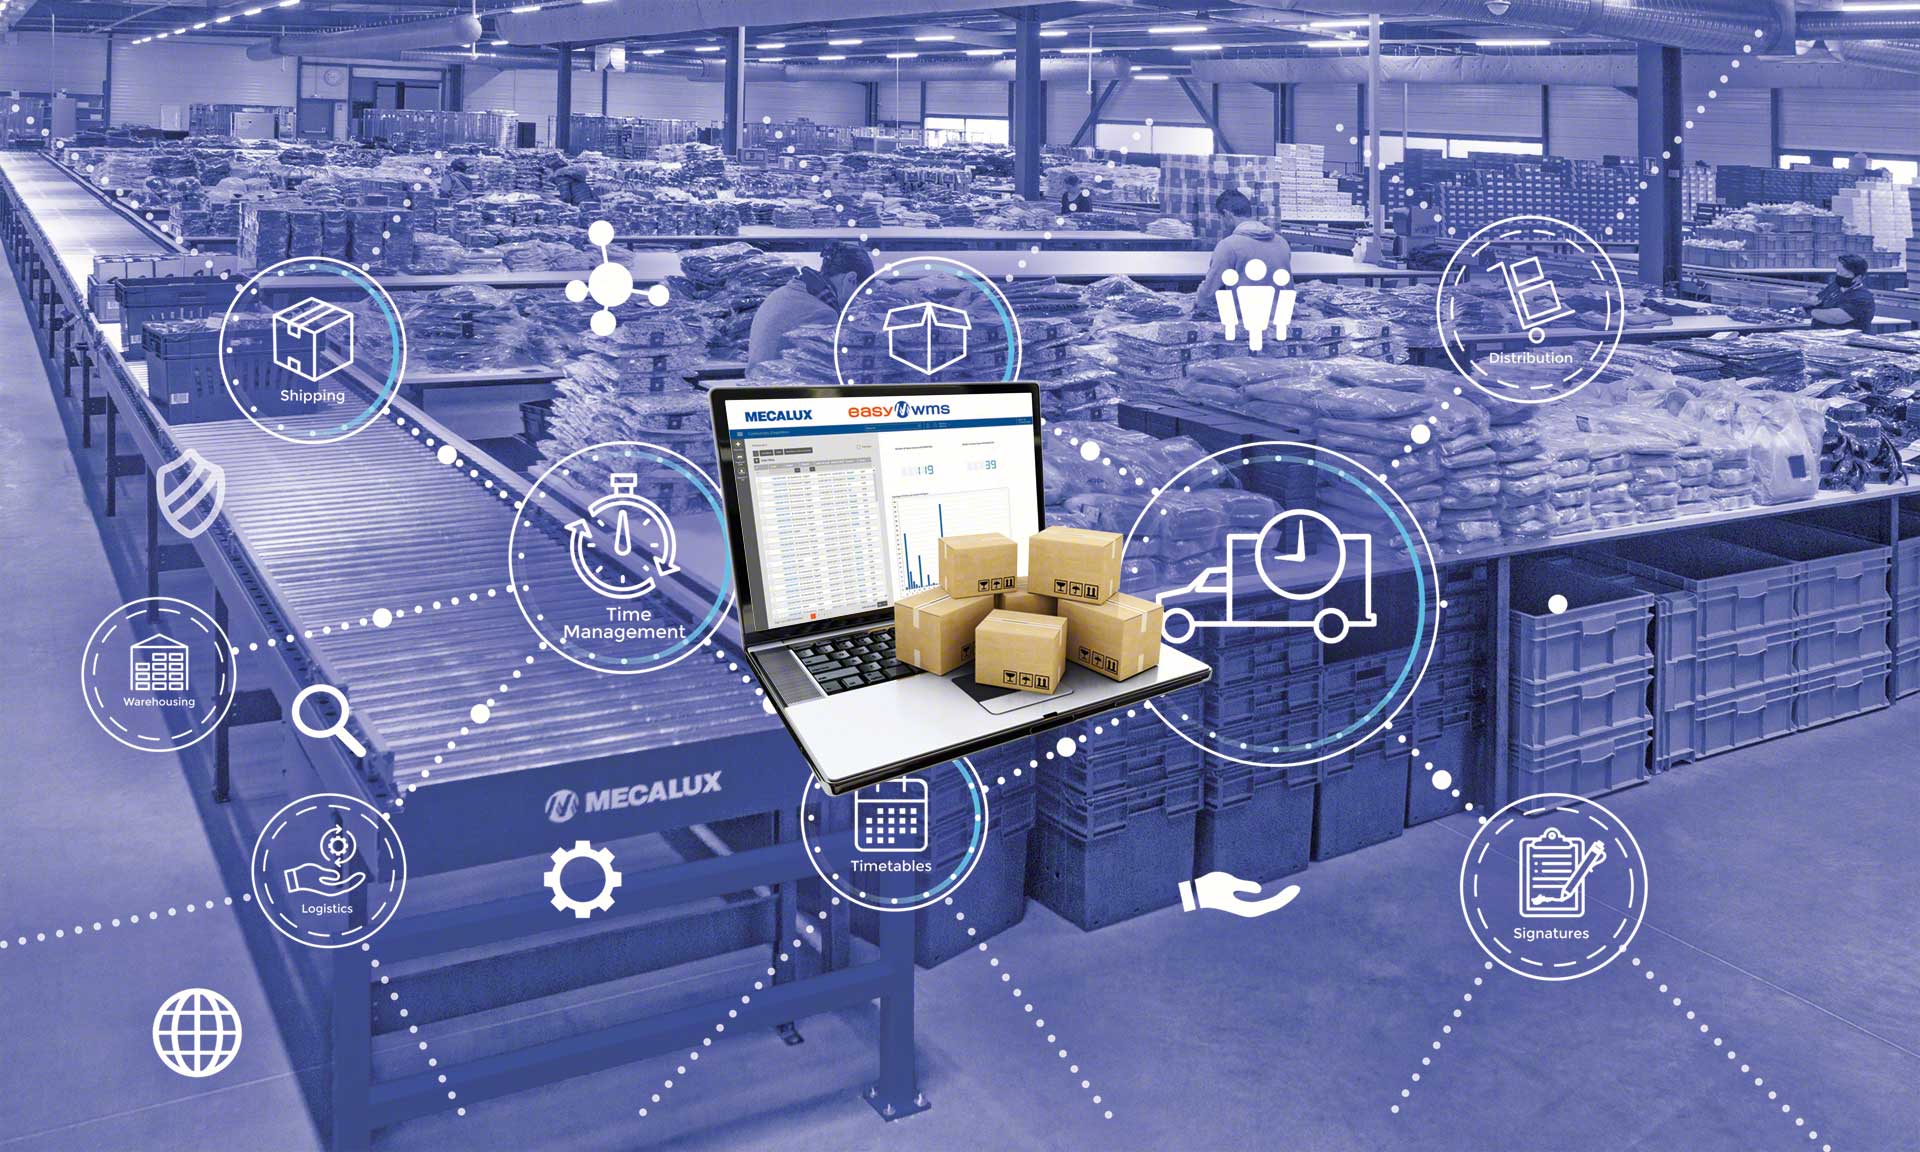 Inventory management is vital for the proper operation of companies